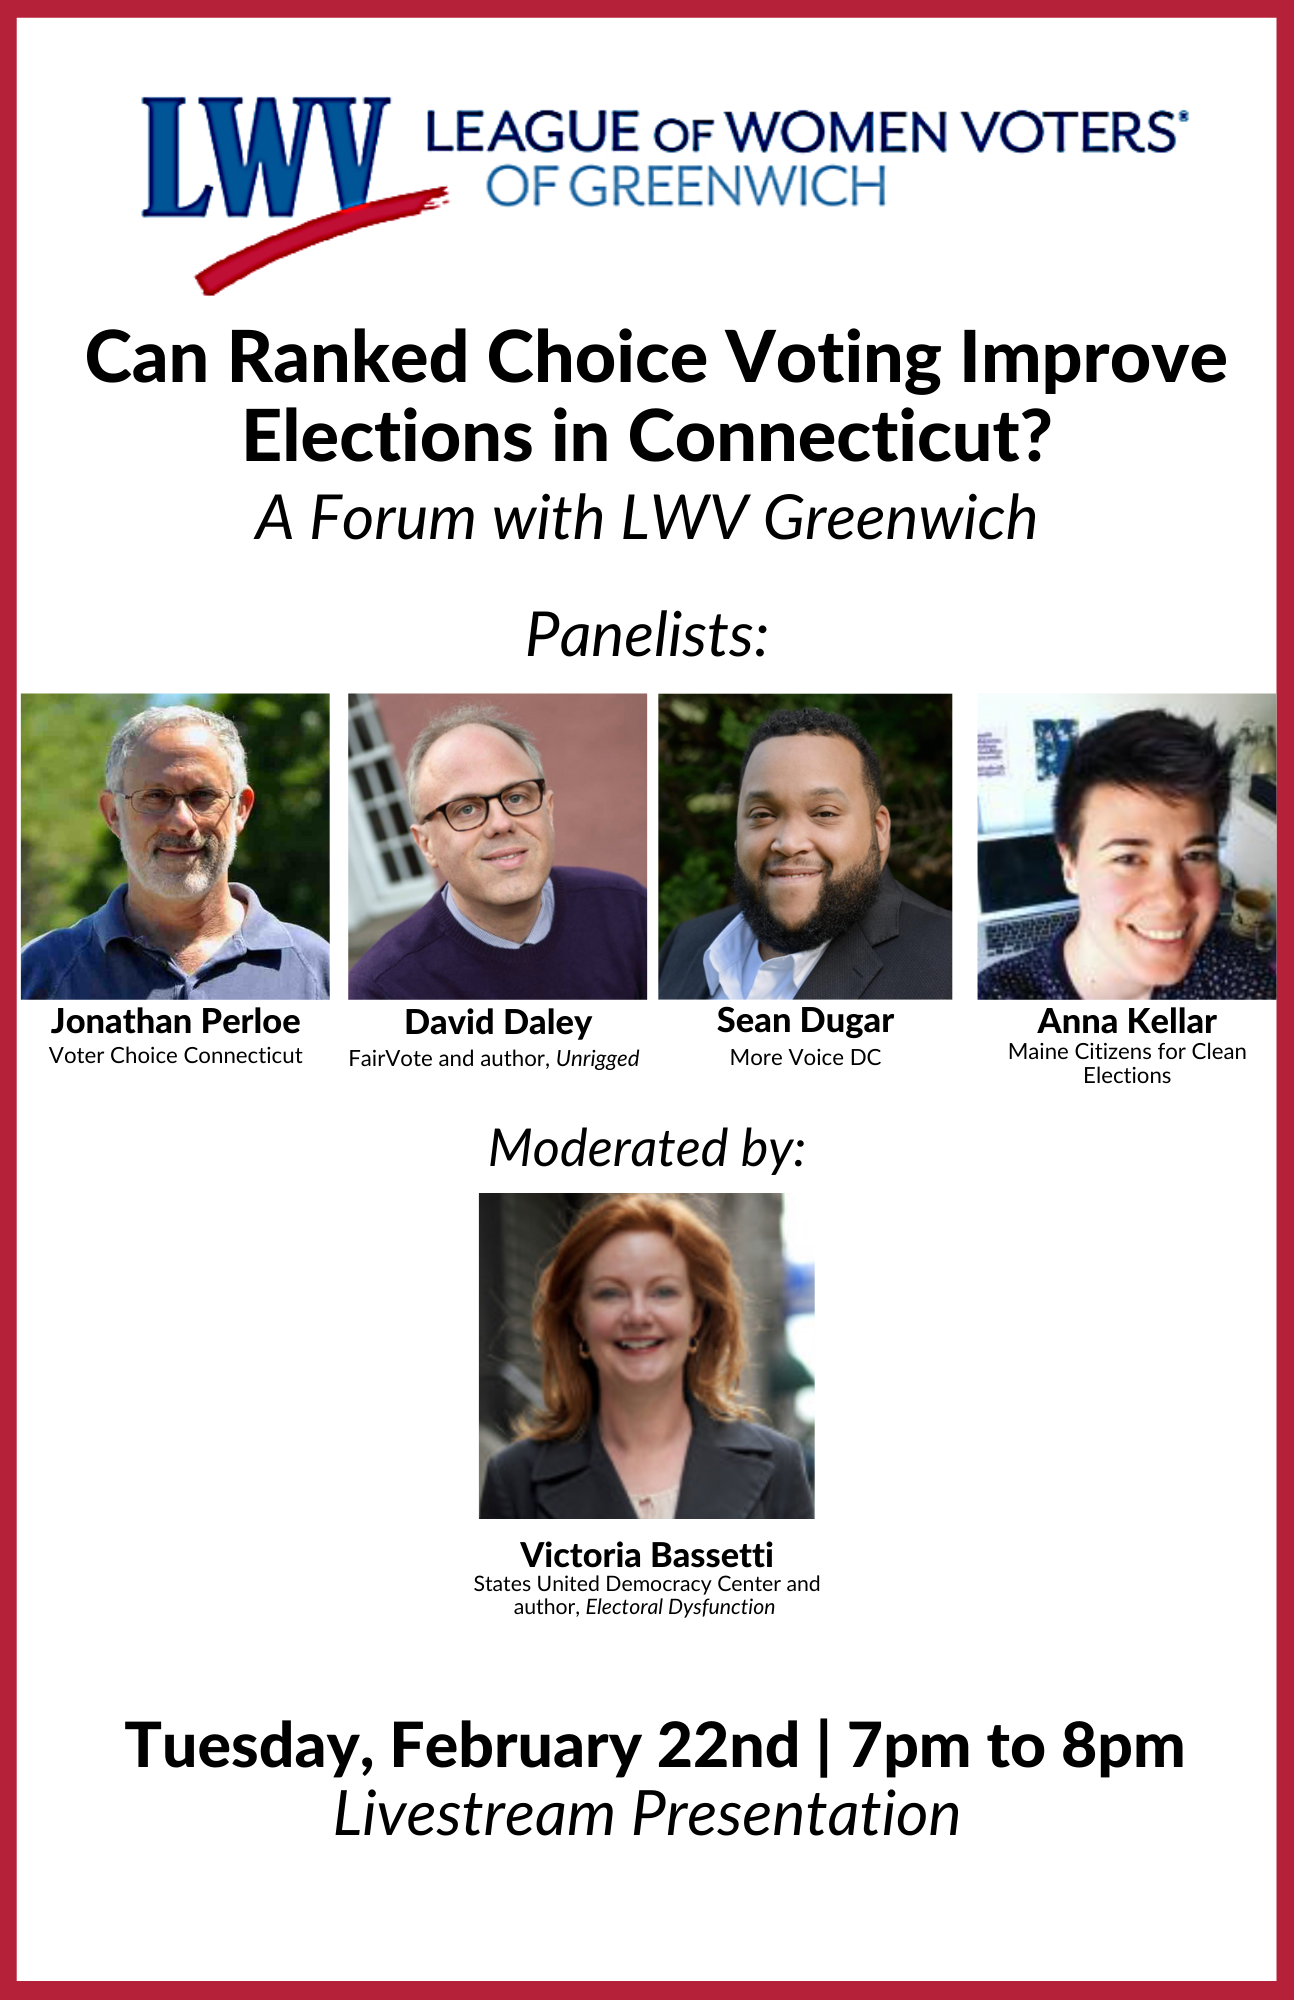 Can Ranked Choice Voting Improve Elections in Connecticut? A Forum with